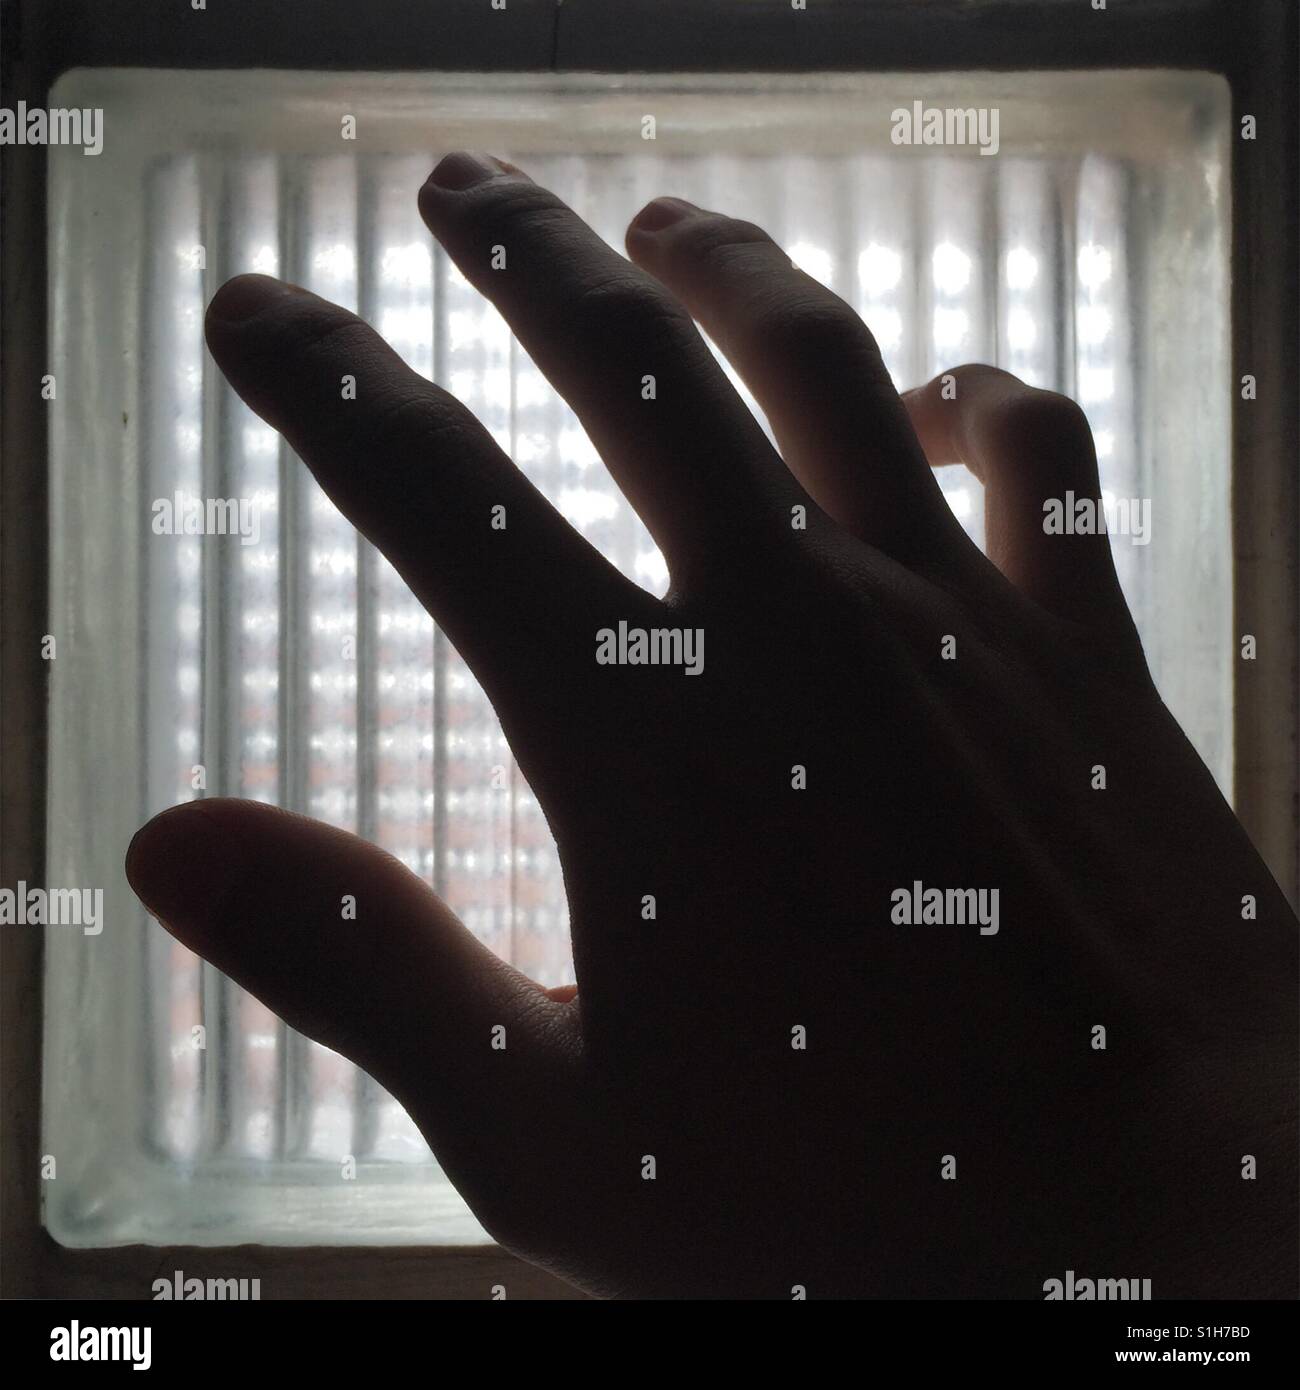 Hand reaching out to a frosted glass window. Stock Photo